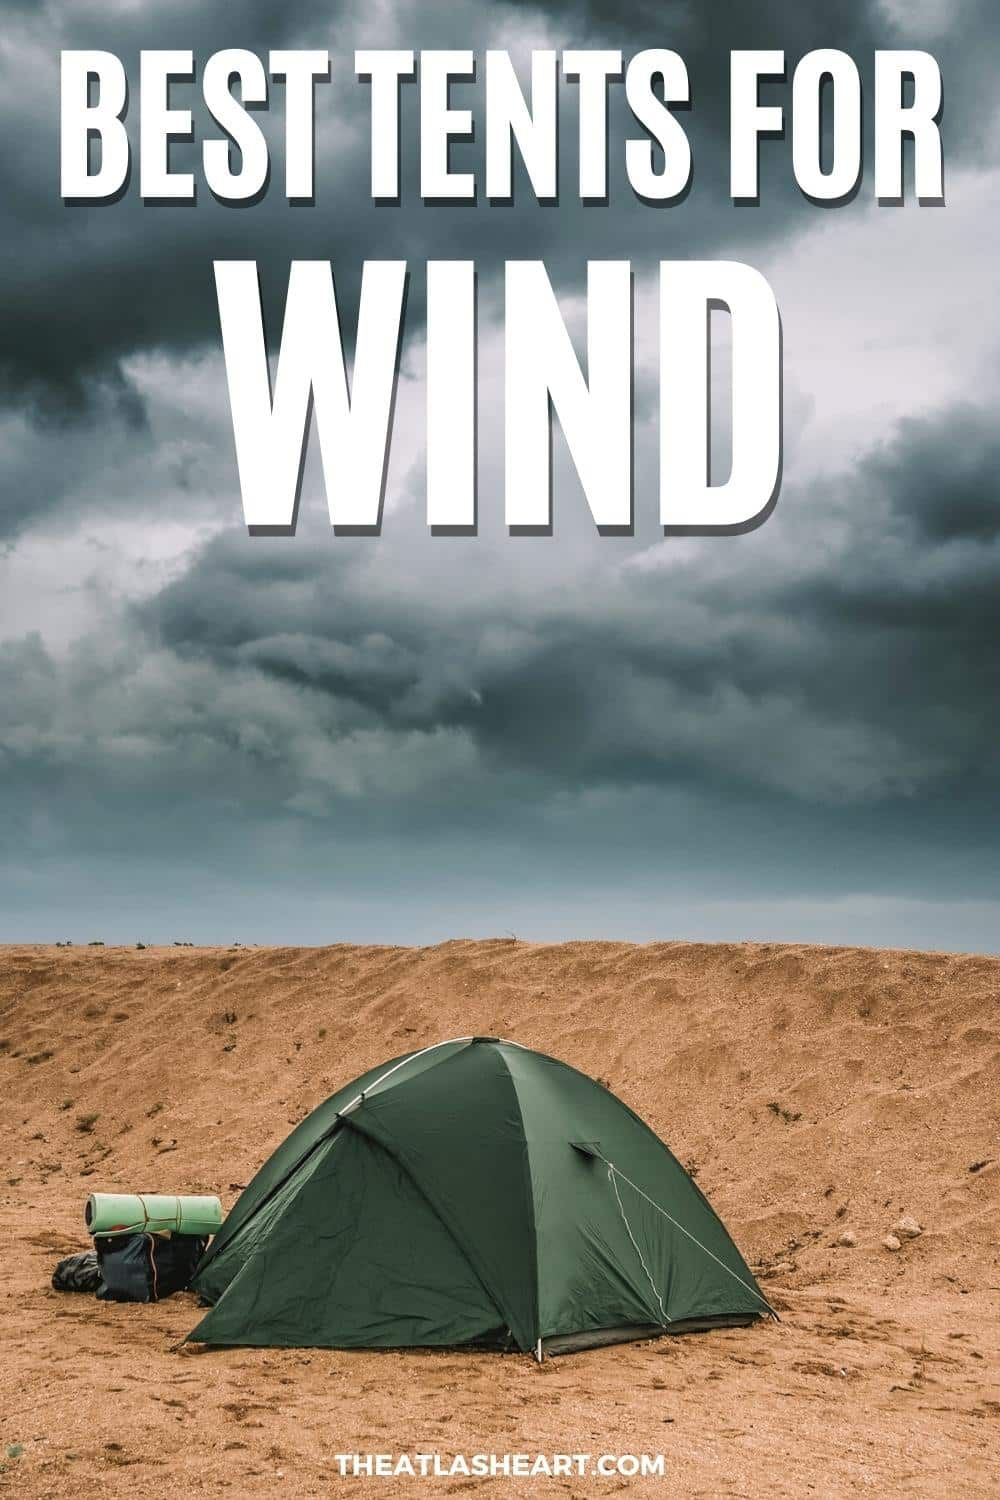 11 Best Tents for Wind [Top Tents for High Winds & Bad Weather]